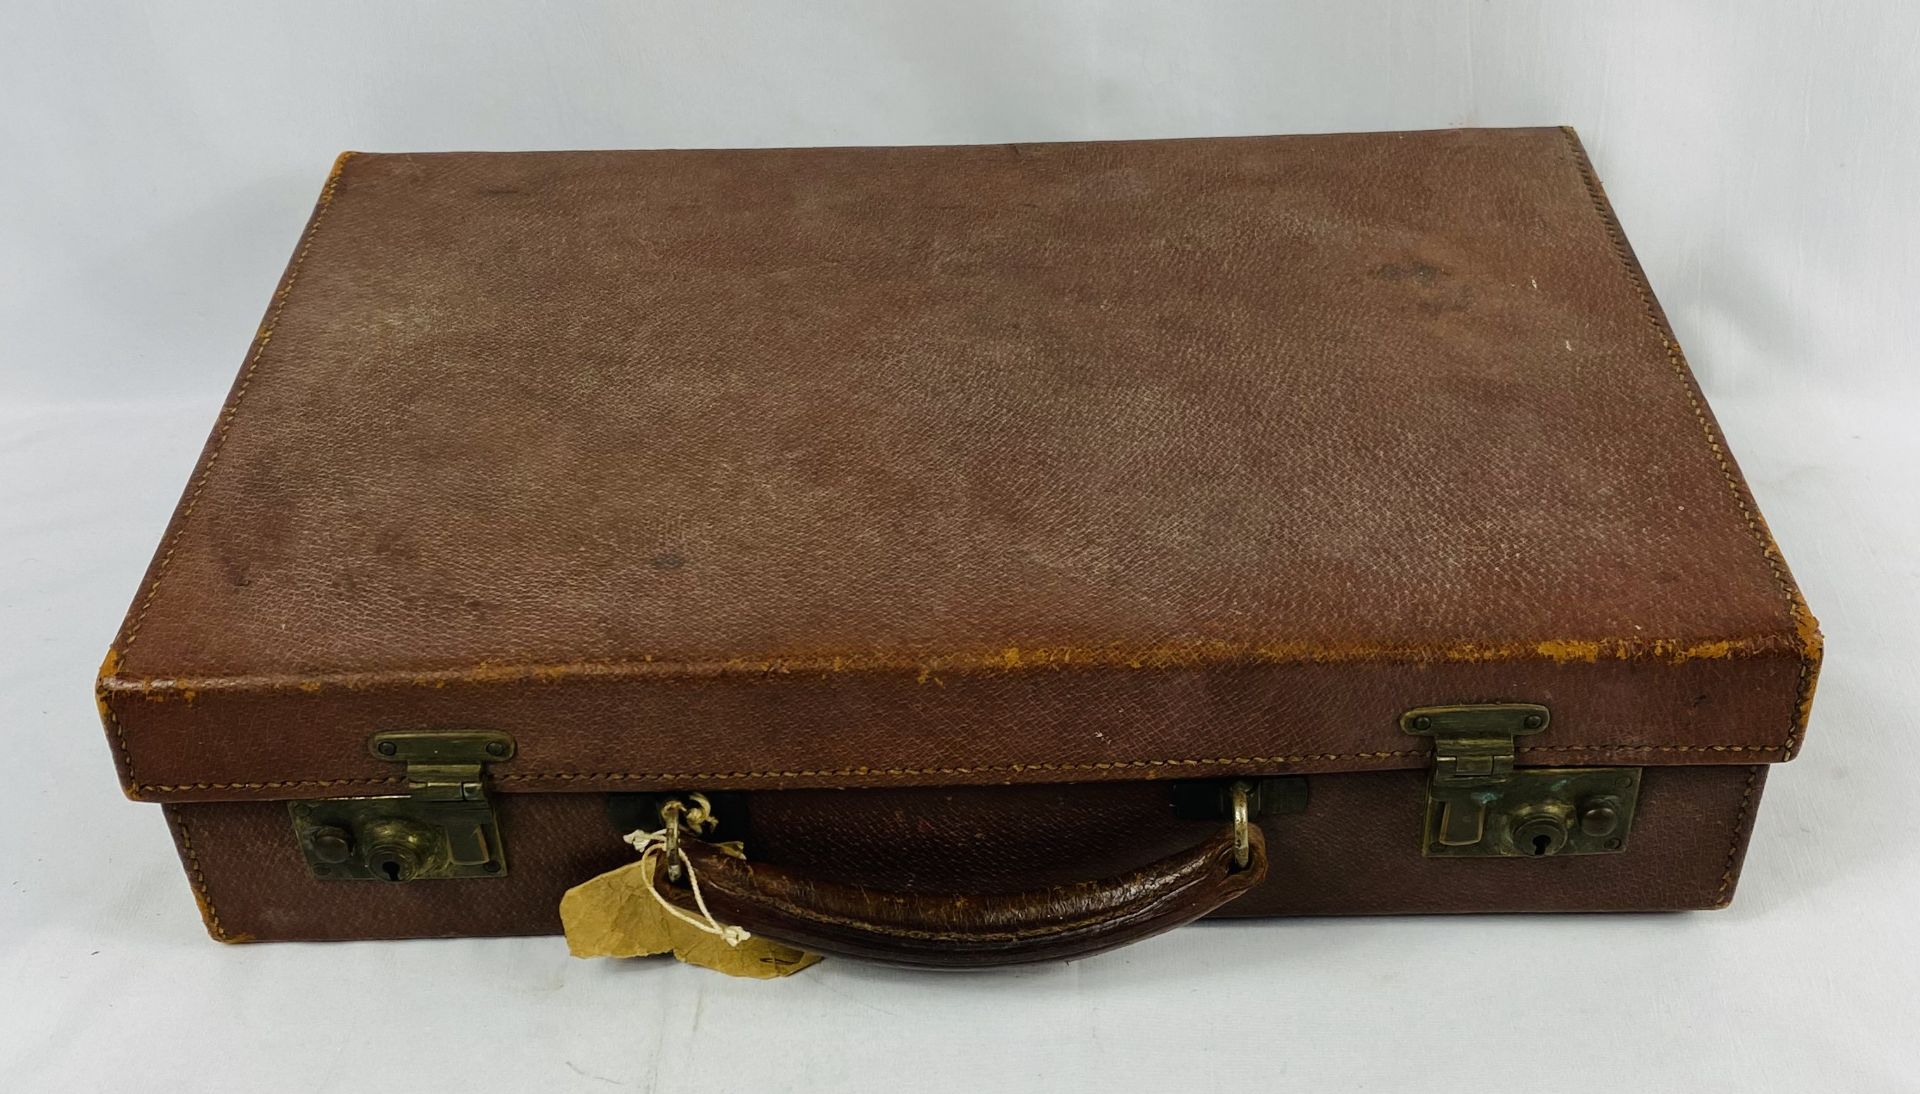 Drew & Sons pig skin attache case - Image 4 of 6